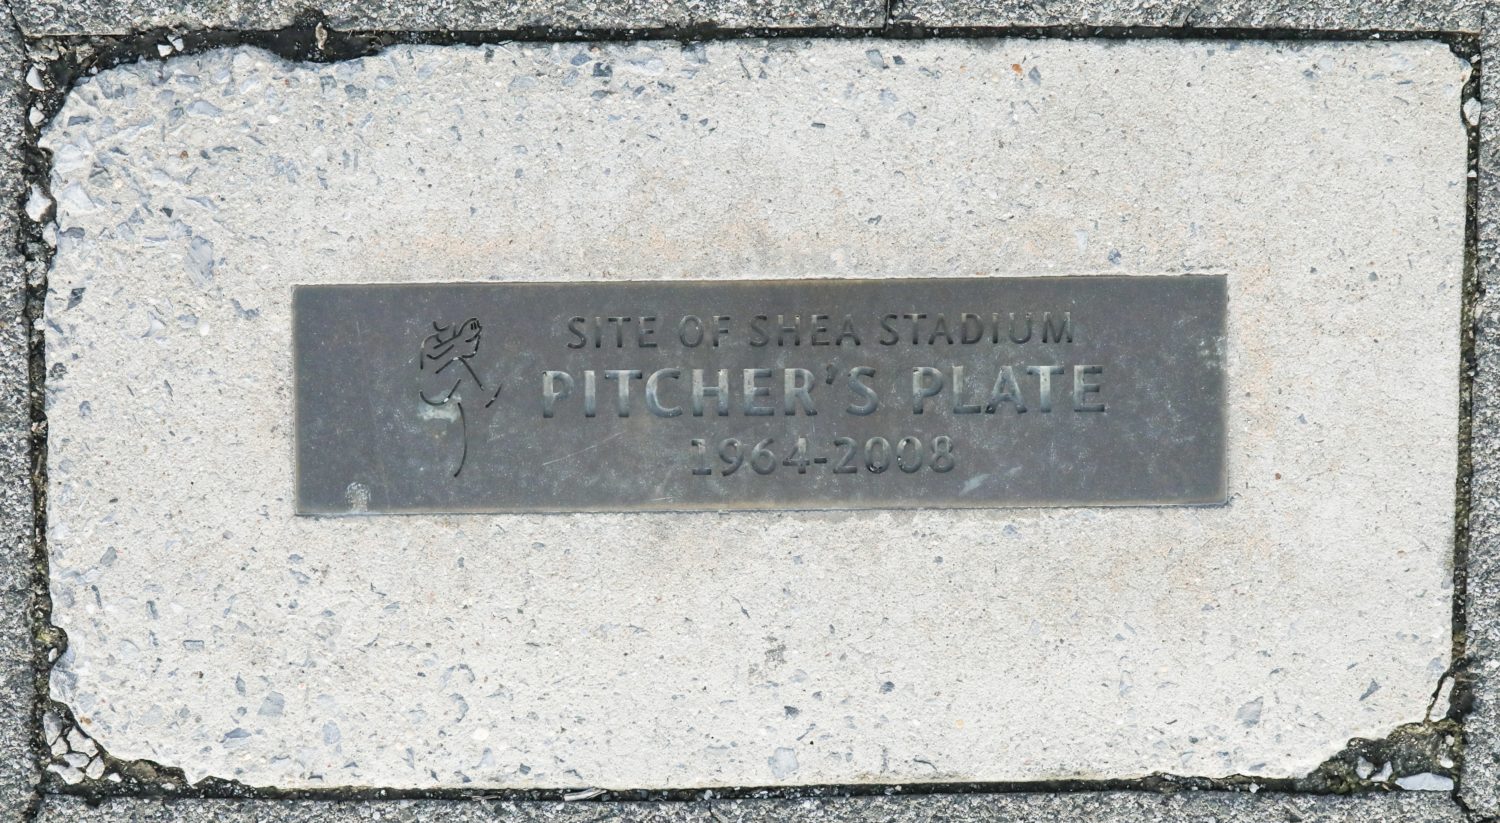 Site of Shea Stadium Pitcher's Plate